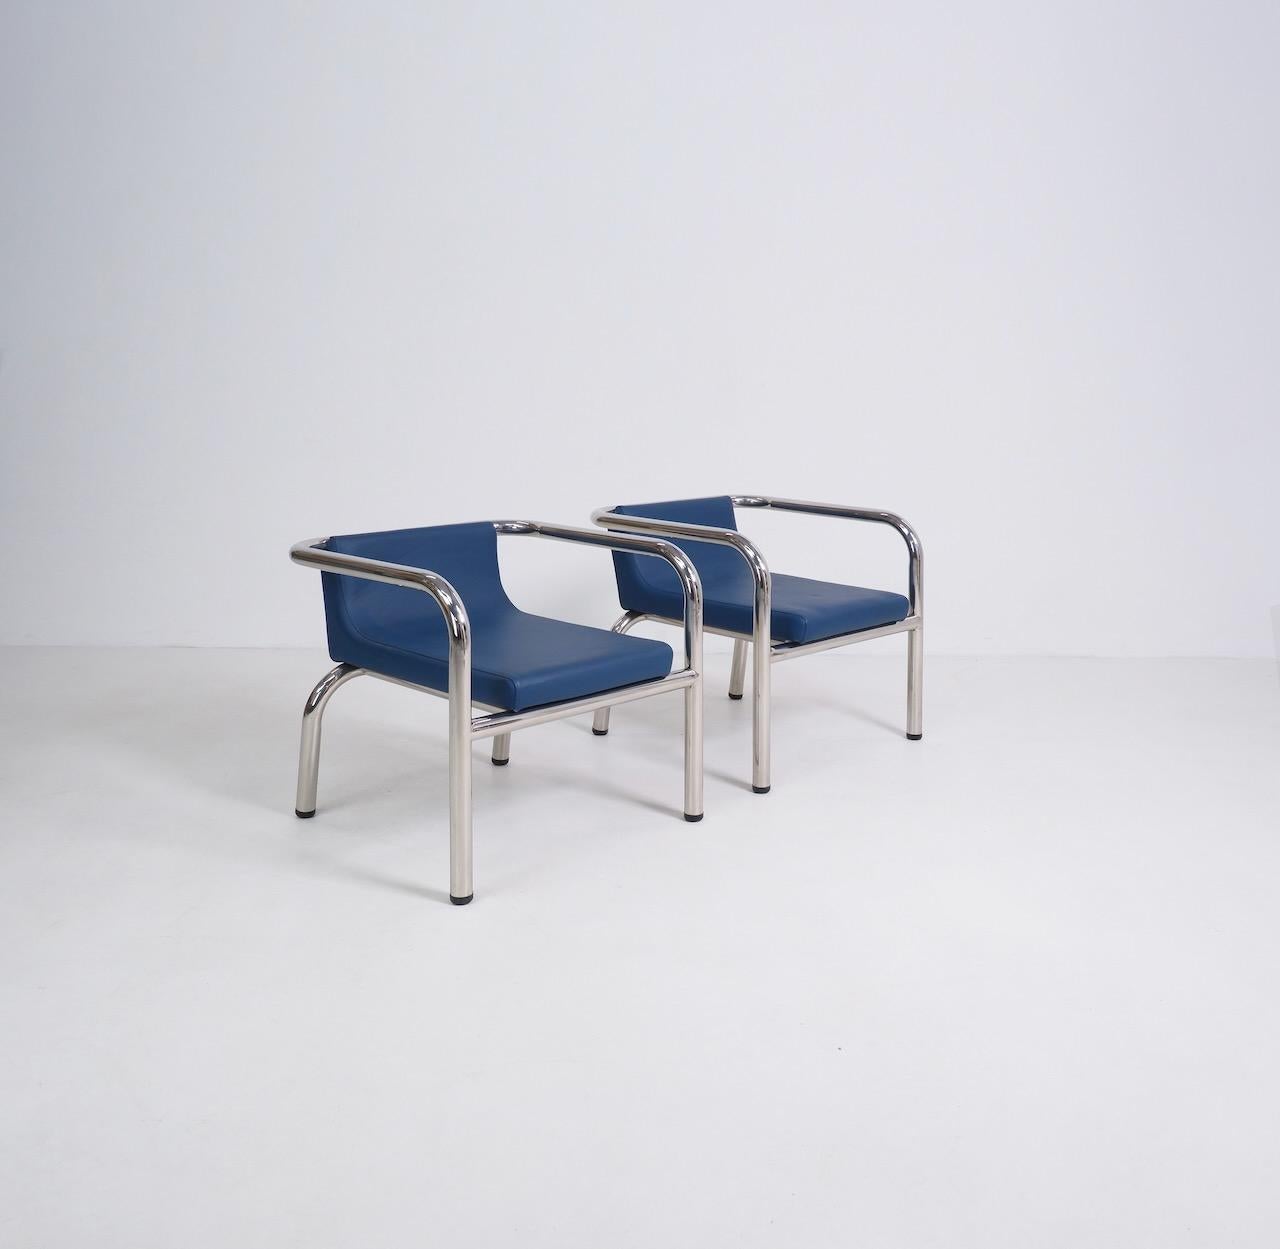 British Limited Edition Tubular Steel Side Chairs by Tom Dixon, circa 2000 For Sale